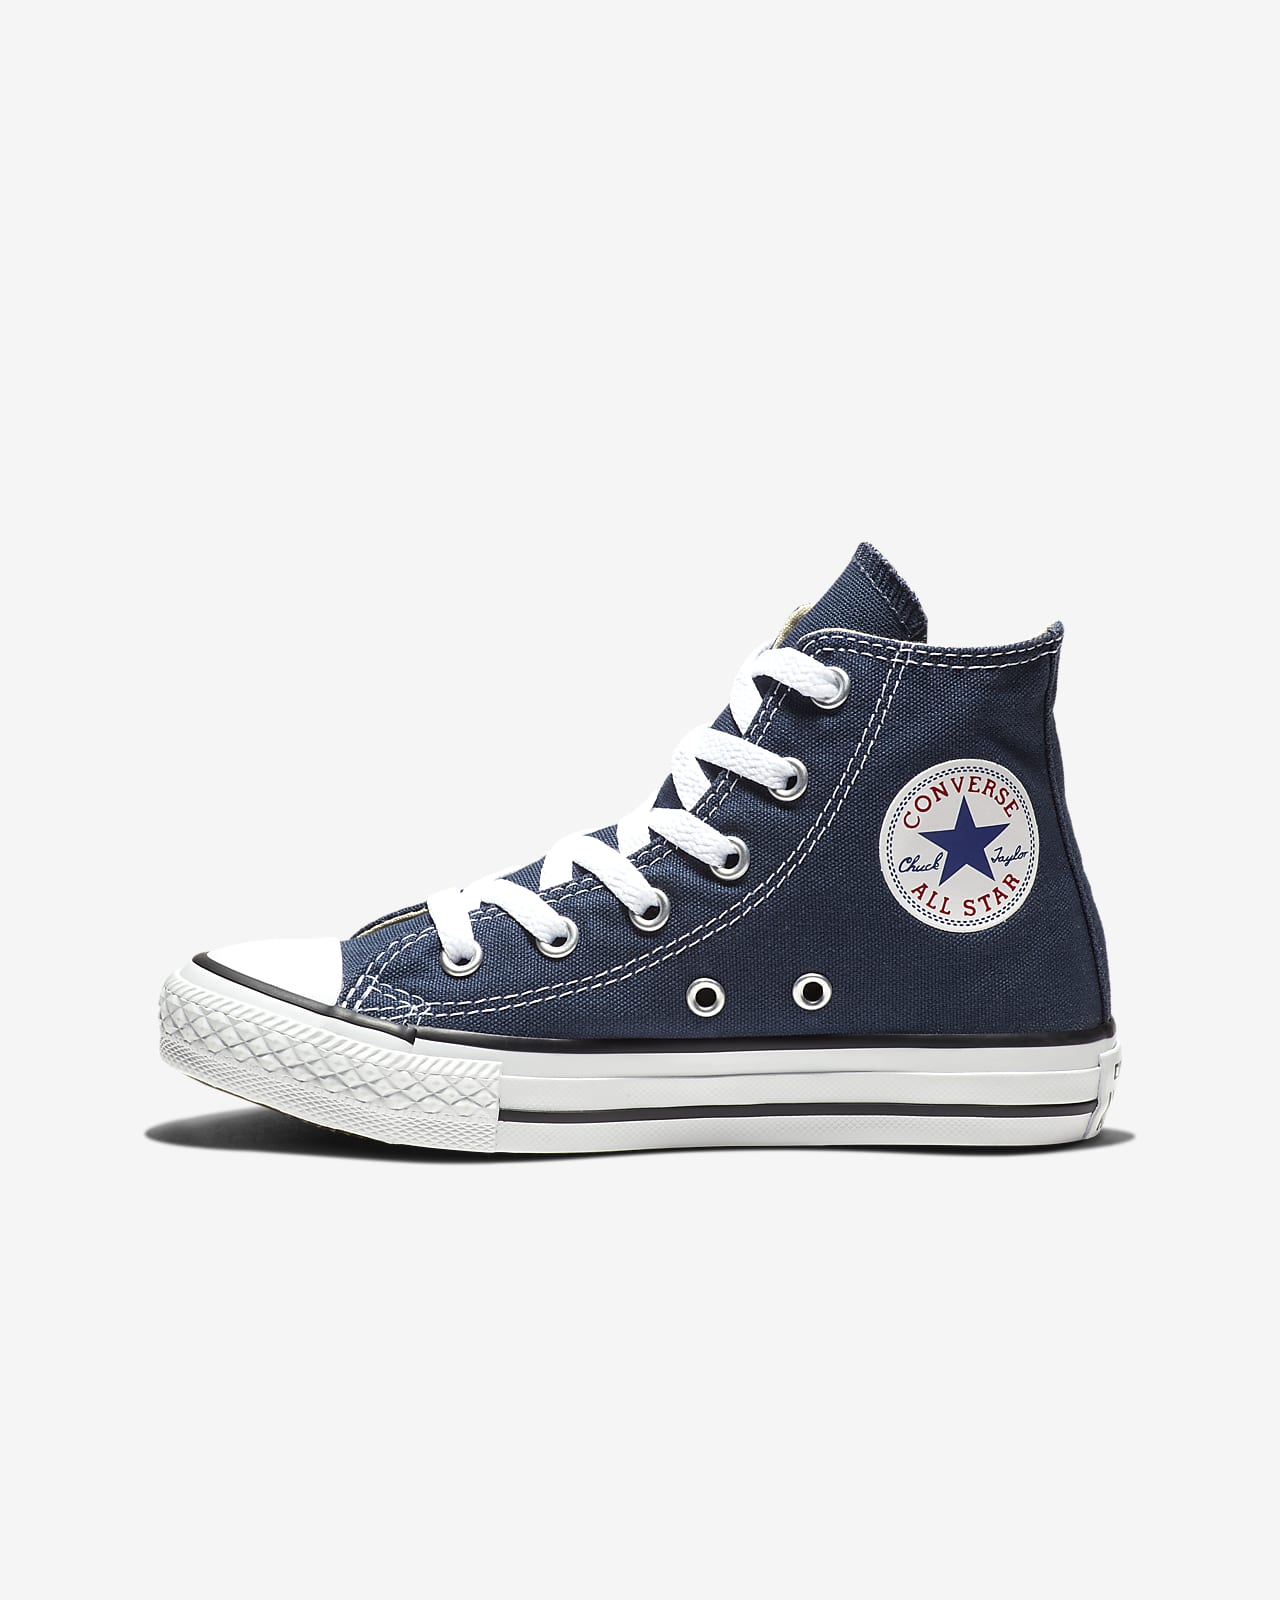 Converse Chuck Taylor All Star High Top (10.5c-3y) Little Kids' Shoe